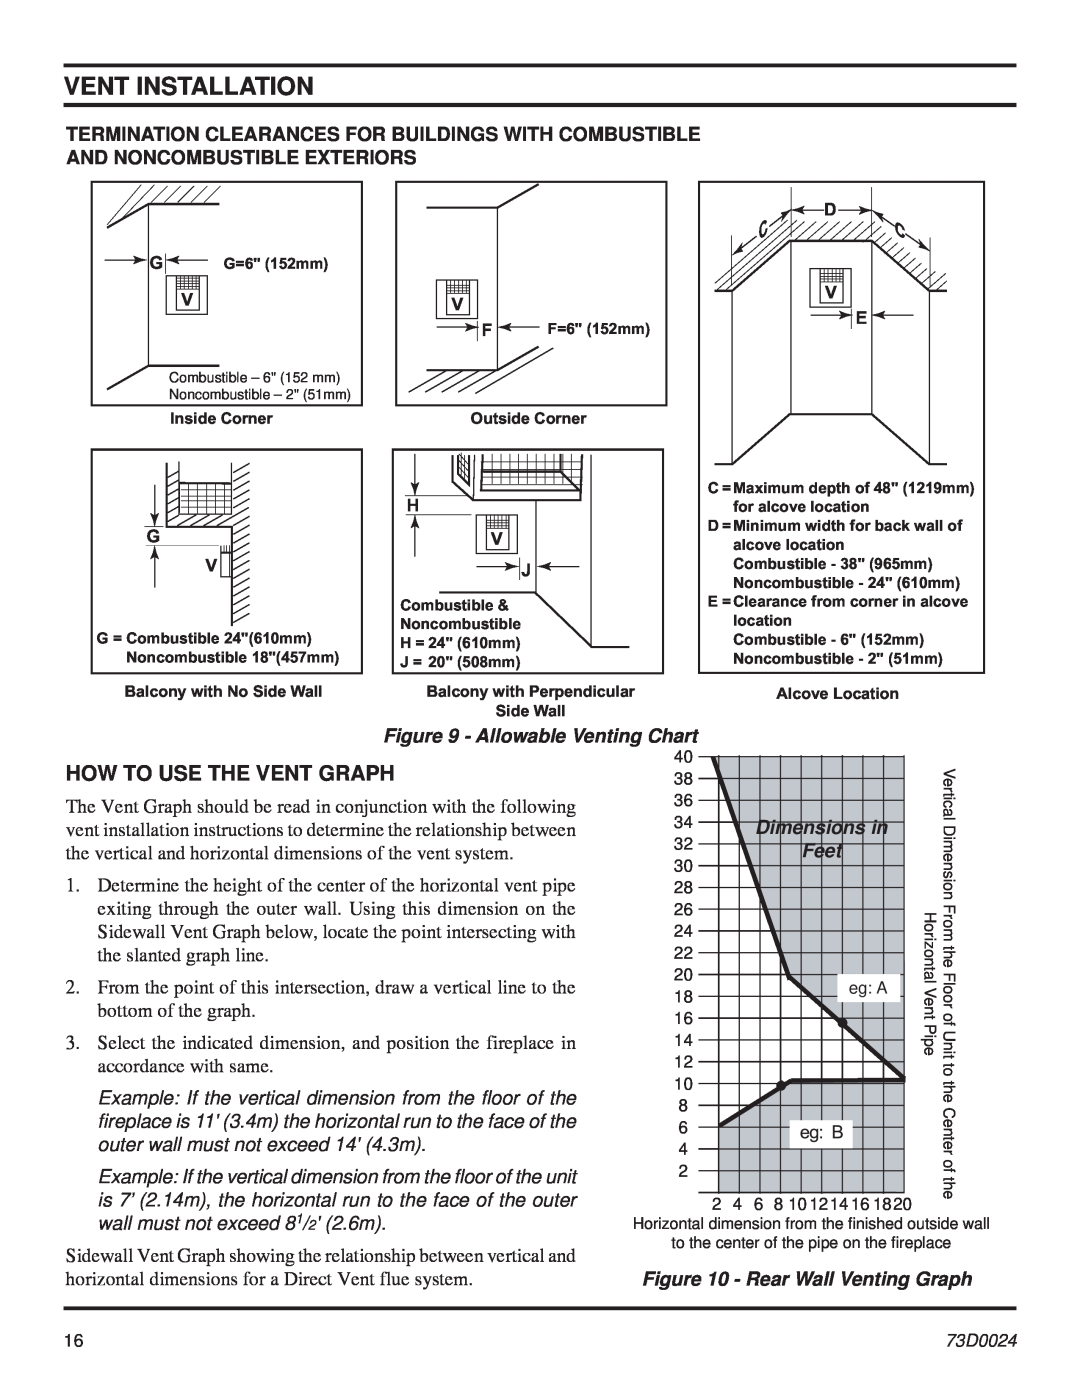 Monessen Hearth KHLDV SERIES How To Use The Vent Graph, Vent Installation, Allowable Venting Chart, Dimensions in, Feet 